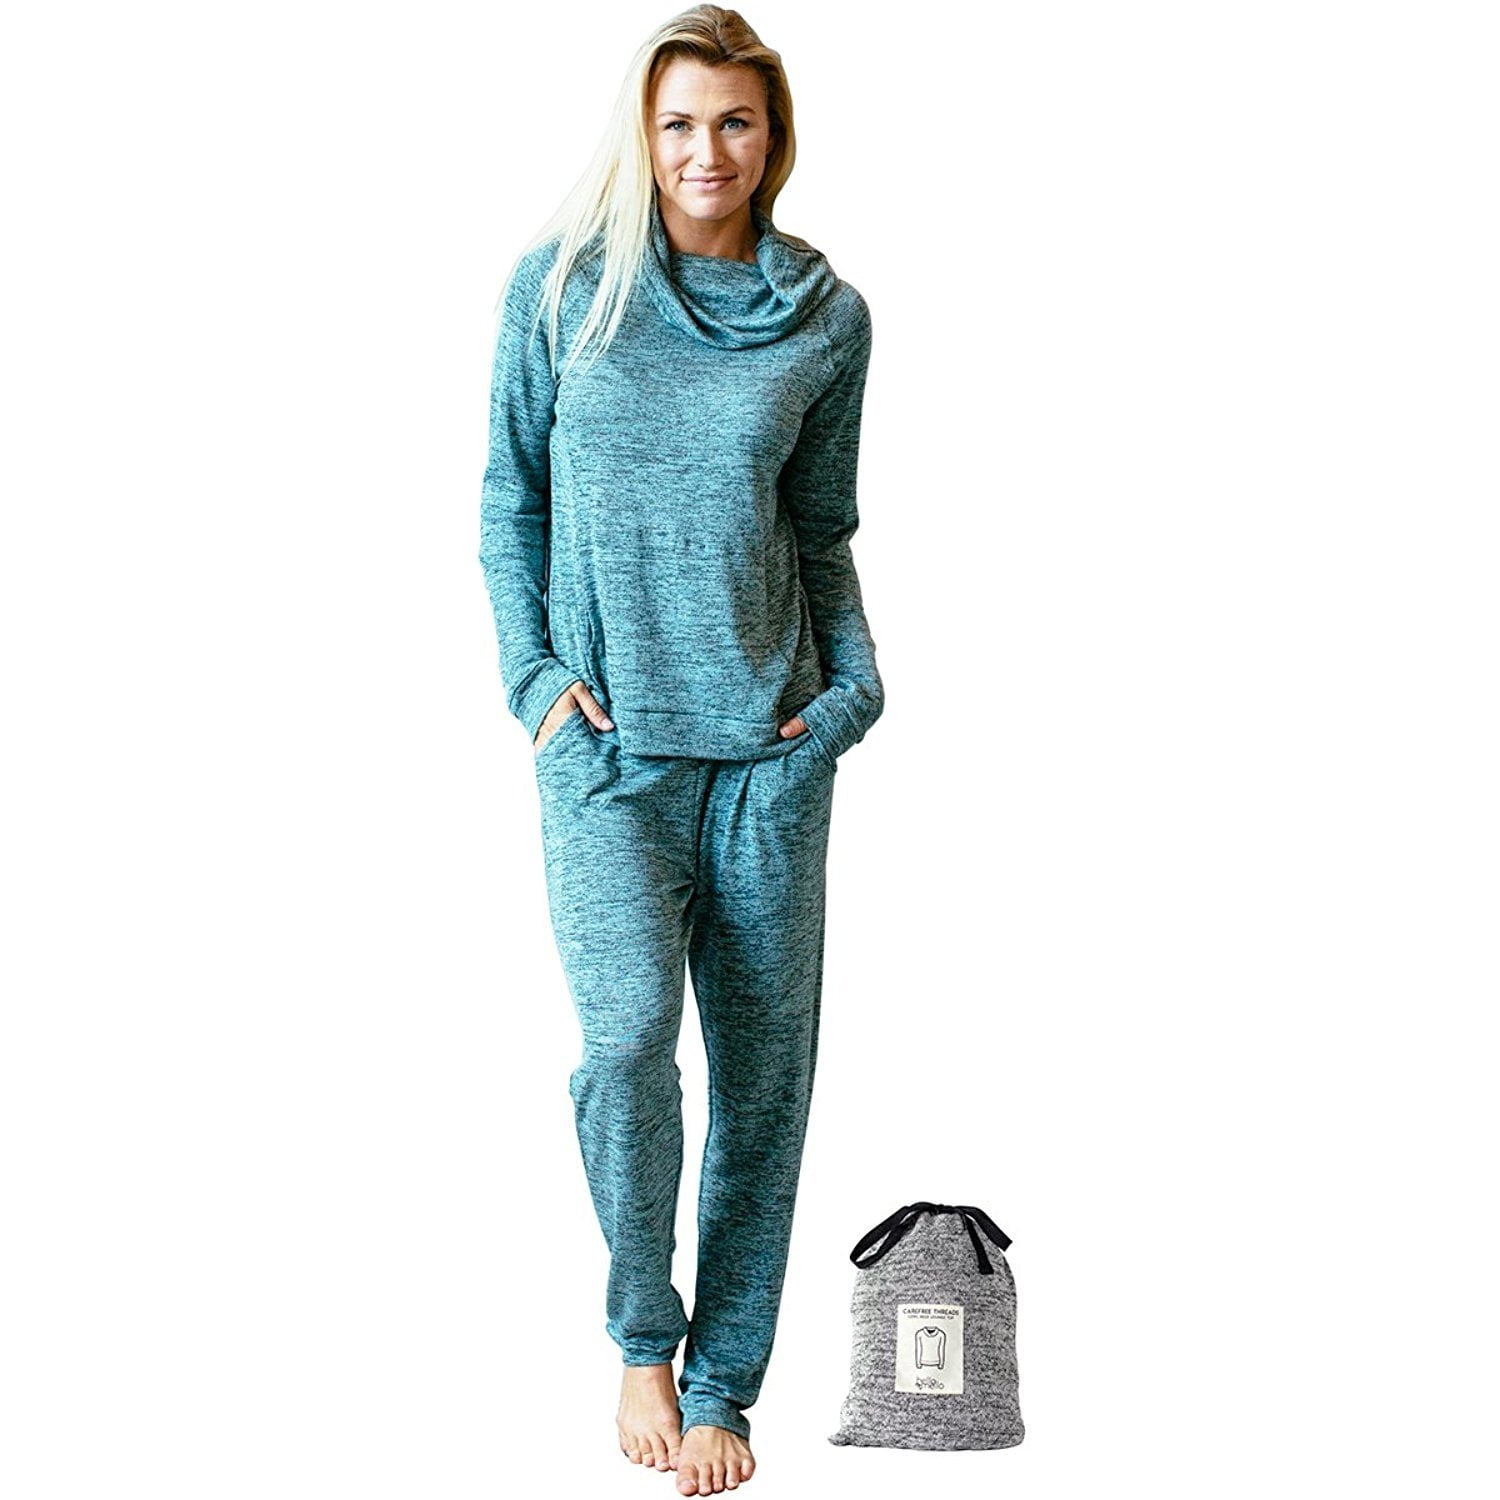 Hello Mello Carefree Threads Womens Loungewear Top with Pocket and Cowl Neck Matching Drawstring Bag